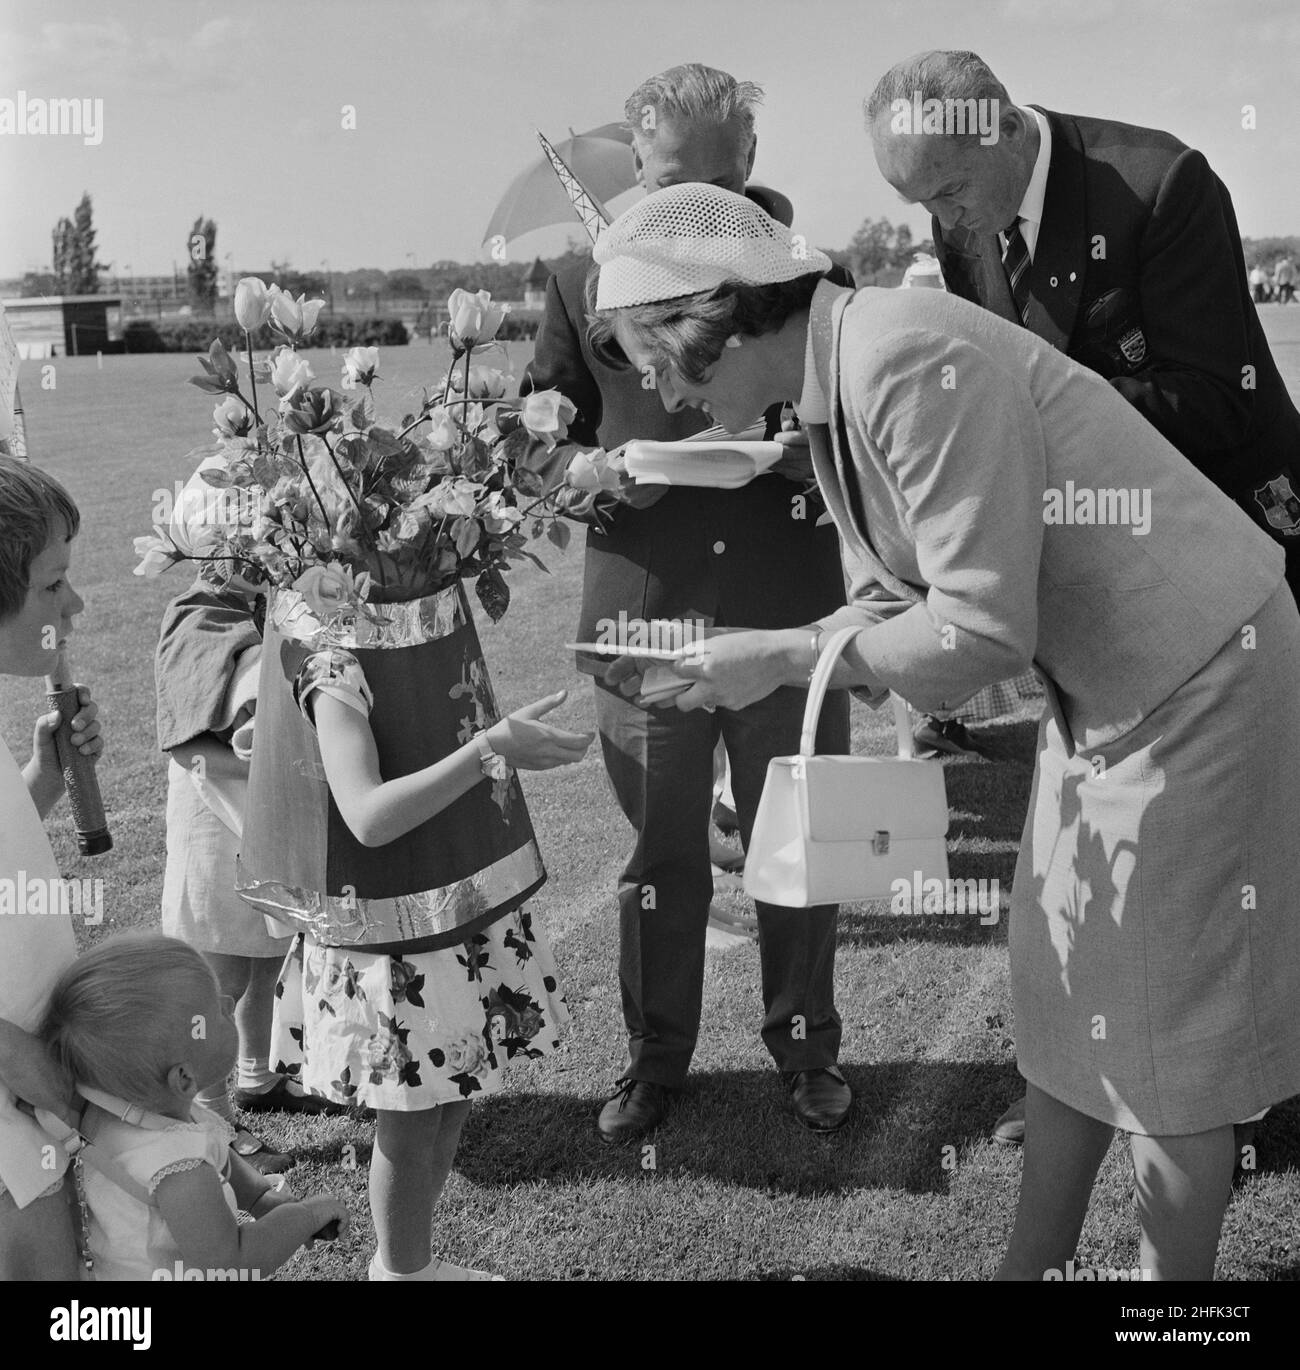 Laing Sports Ground, Rowley Lane, Elstree, Barnet, London, 26/06/1965. Hilda Laing at the annual Laing sports day, presenting a fancy dress competition prize to a young child dressed as a vase of flowers. In 1965 Laing's annual sports day was held at the sports ground on Rowley Lane on 26th June. As well as football and athletics, there were novelty events including the sack race and Donkey Derby, and events for children including go-kart races, fancy dress competitions, and pony rides. Stock Photo